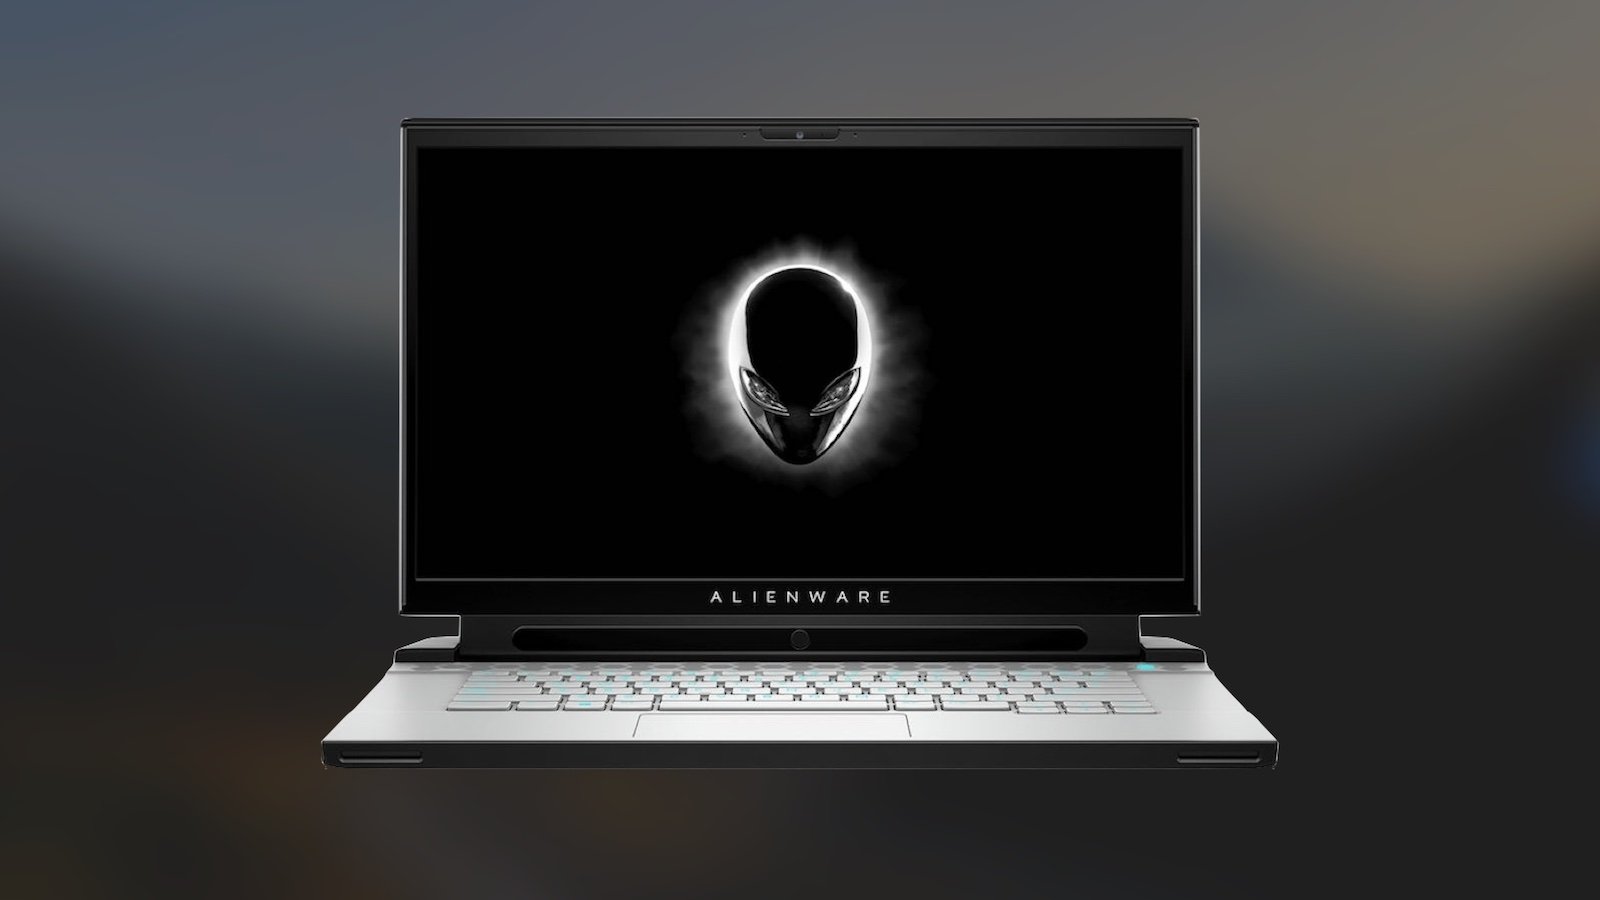 Alienware m15 R4 and m17 R4 gaming laptops feature a GeForce RTX 3080 Laptop GPU